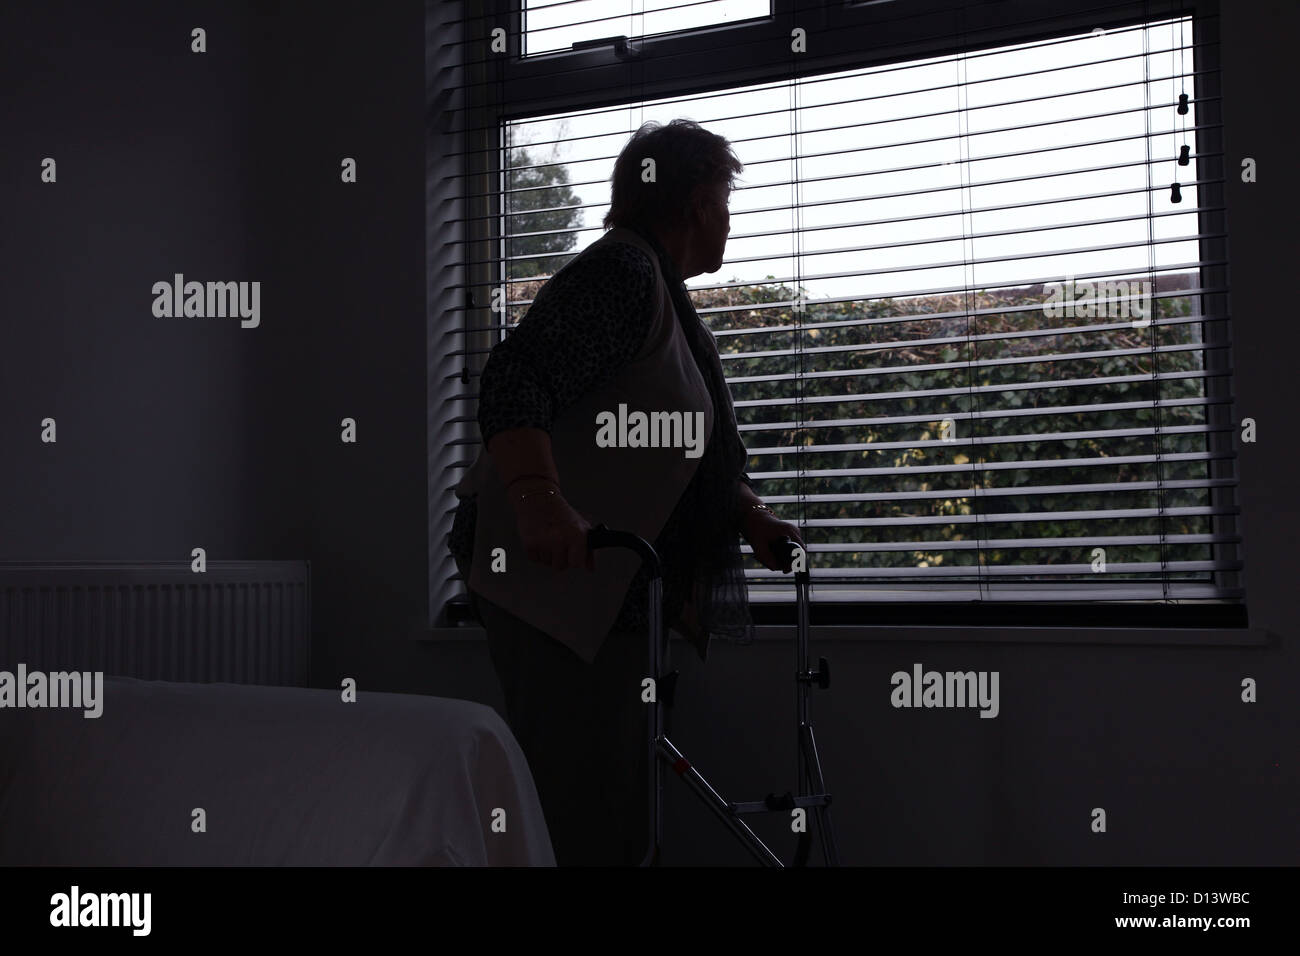 Senior woman alone with a walking frame looking out of a window blind. Rear or side view, silhouette. Stock Photo